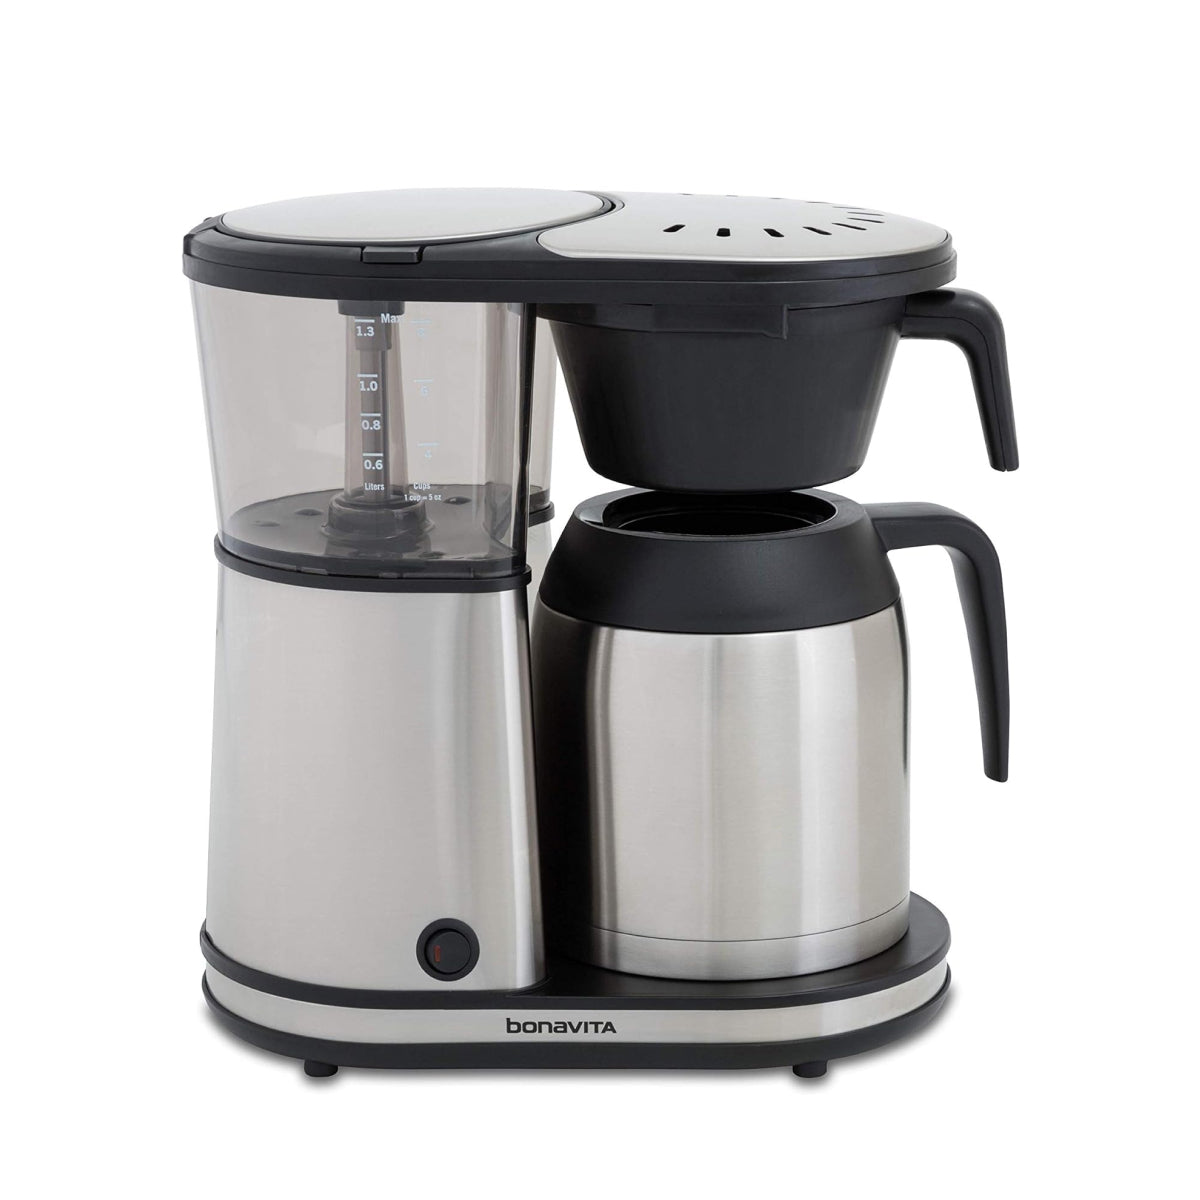 Bonavita 8-Cup Coffee Maker with Stainless Steel Carafe